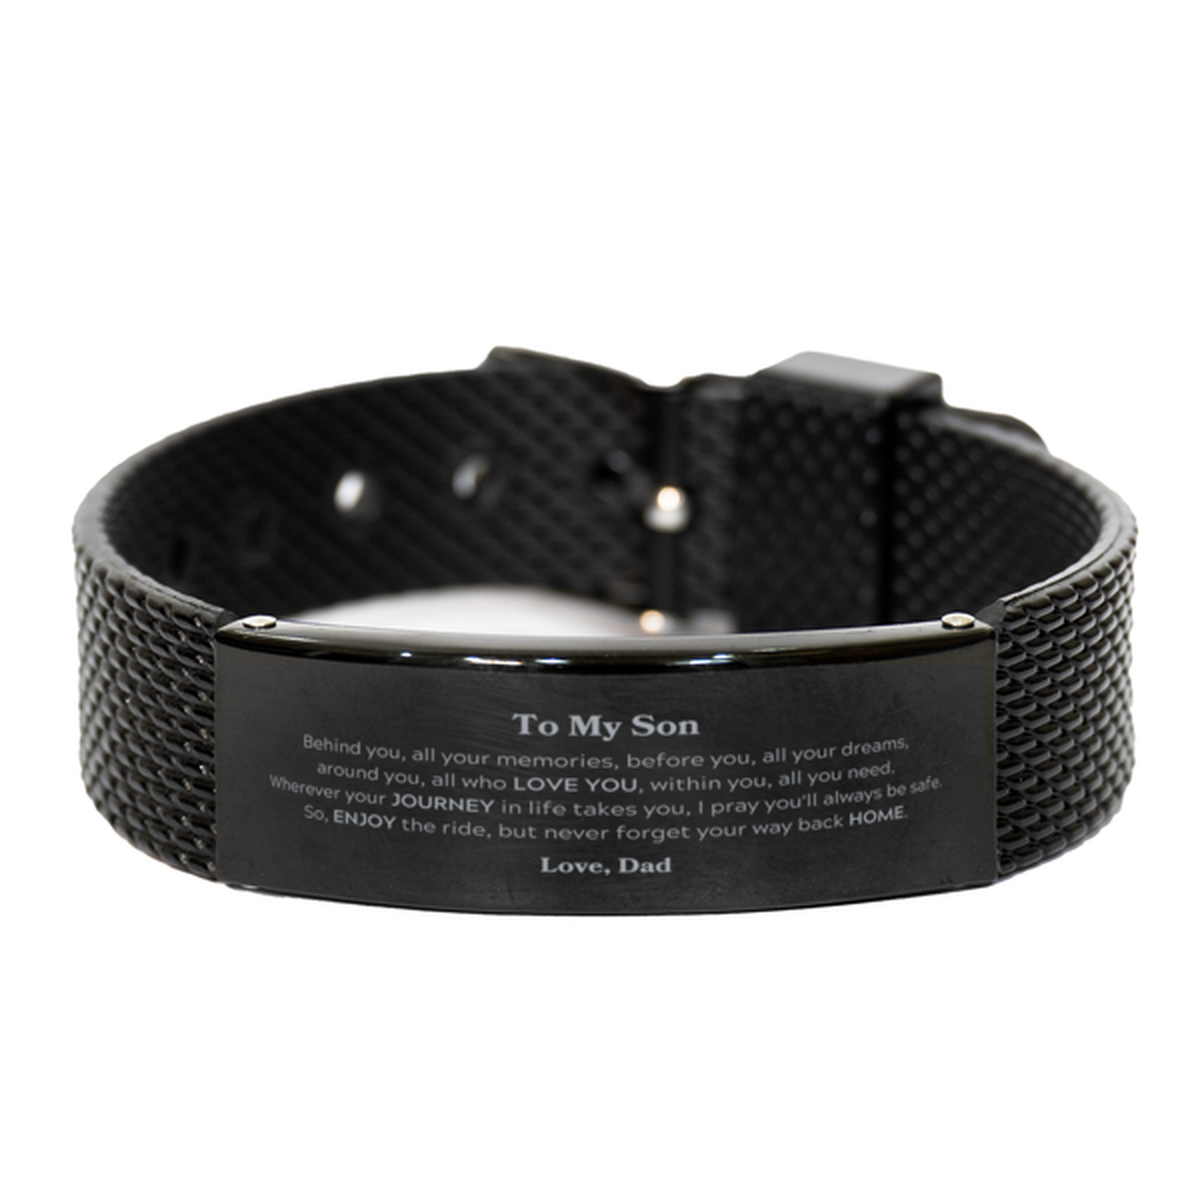 To My Son Graduation Gifts from Dad, Son Black Shark Mesh Bracelet Christmas Birthday Gifts for Son Behind you, all your memories, before you, all your dreams. Love, Dad